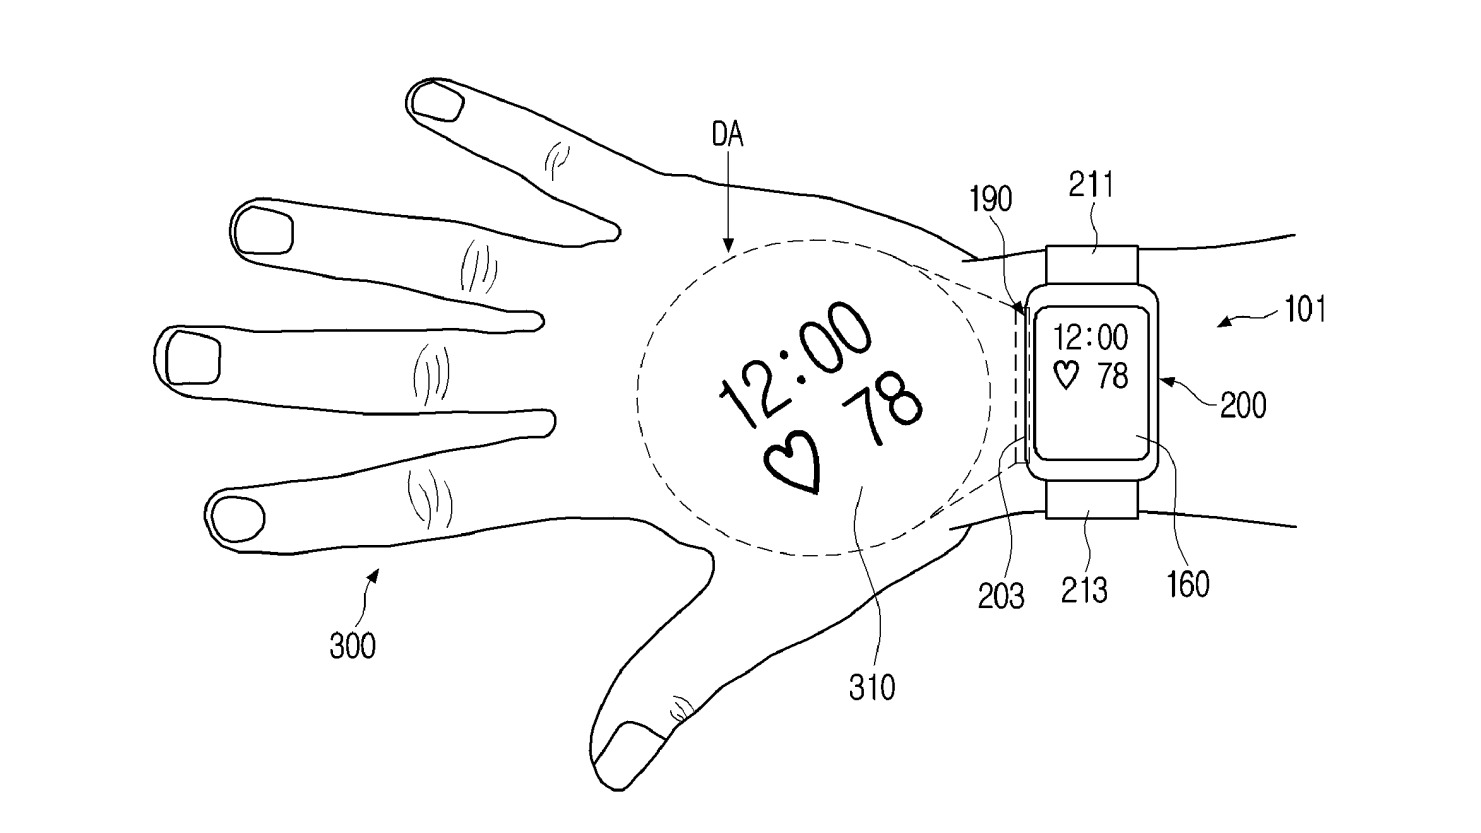 Patent showing a smartwatch with a projector